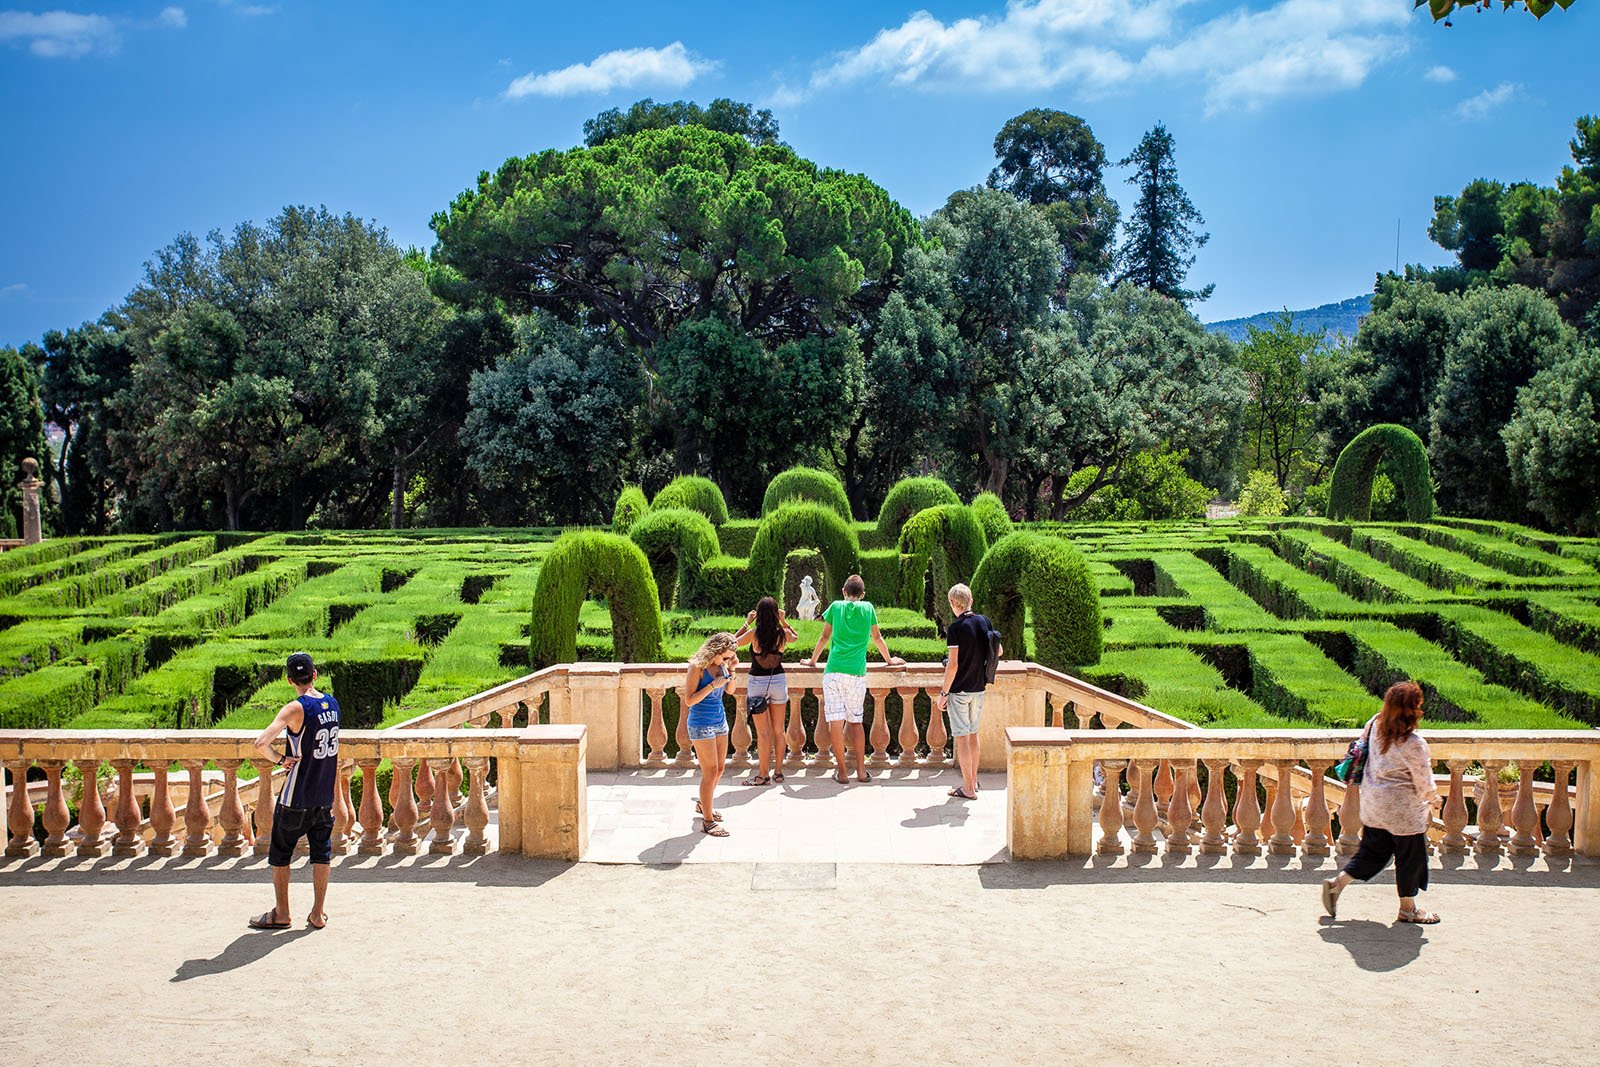 How to escape from the Laberint d'Horta in Barcelona